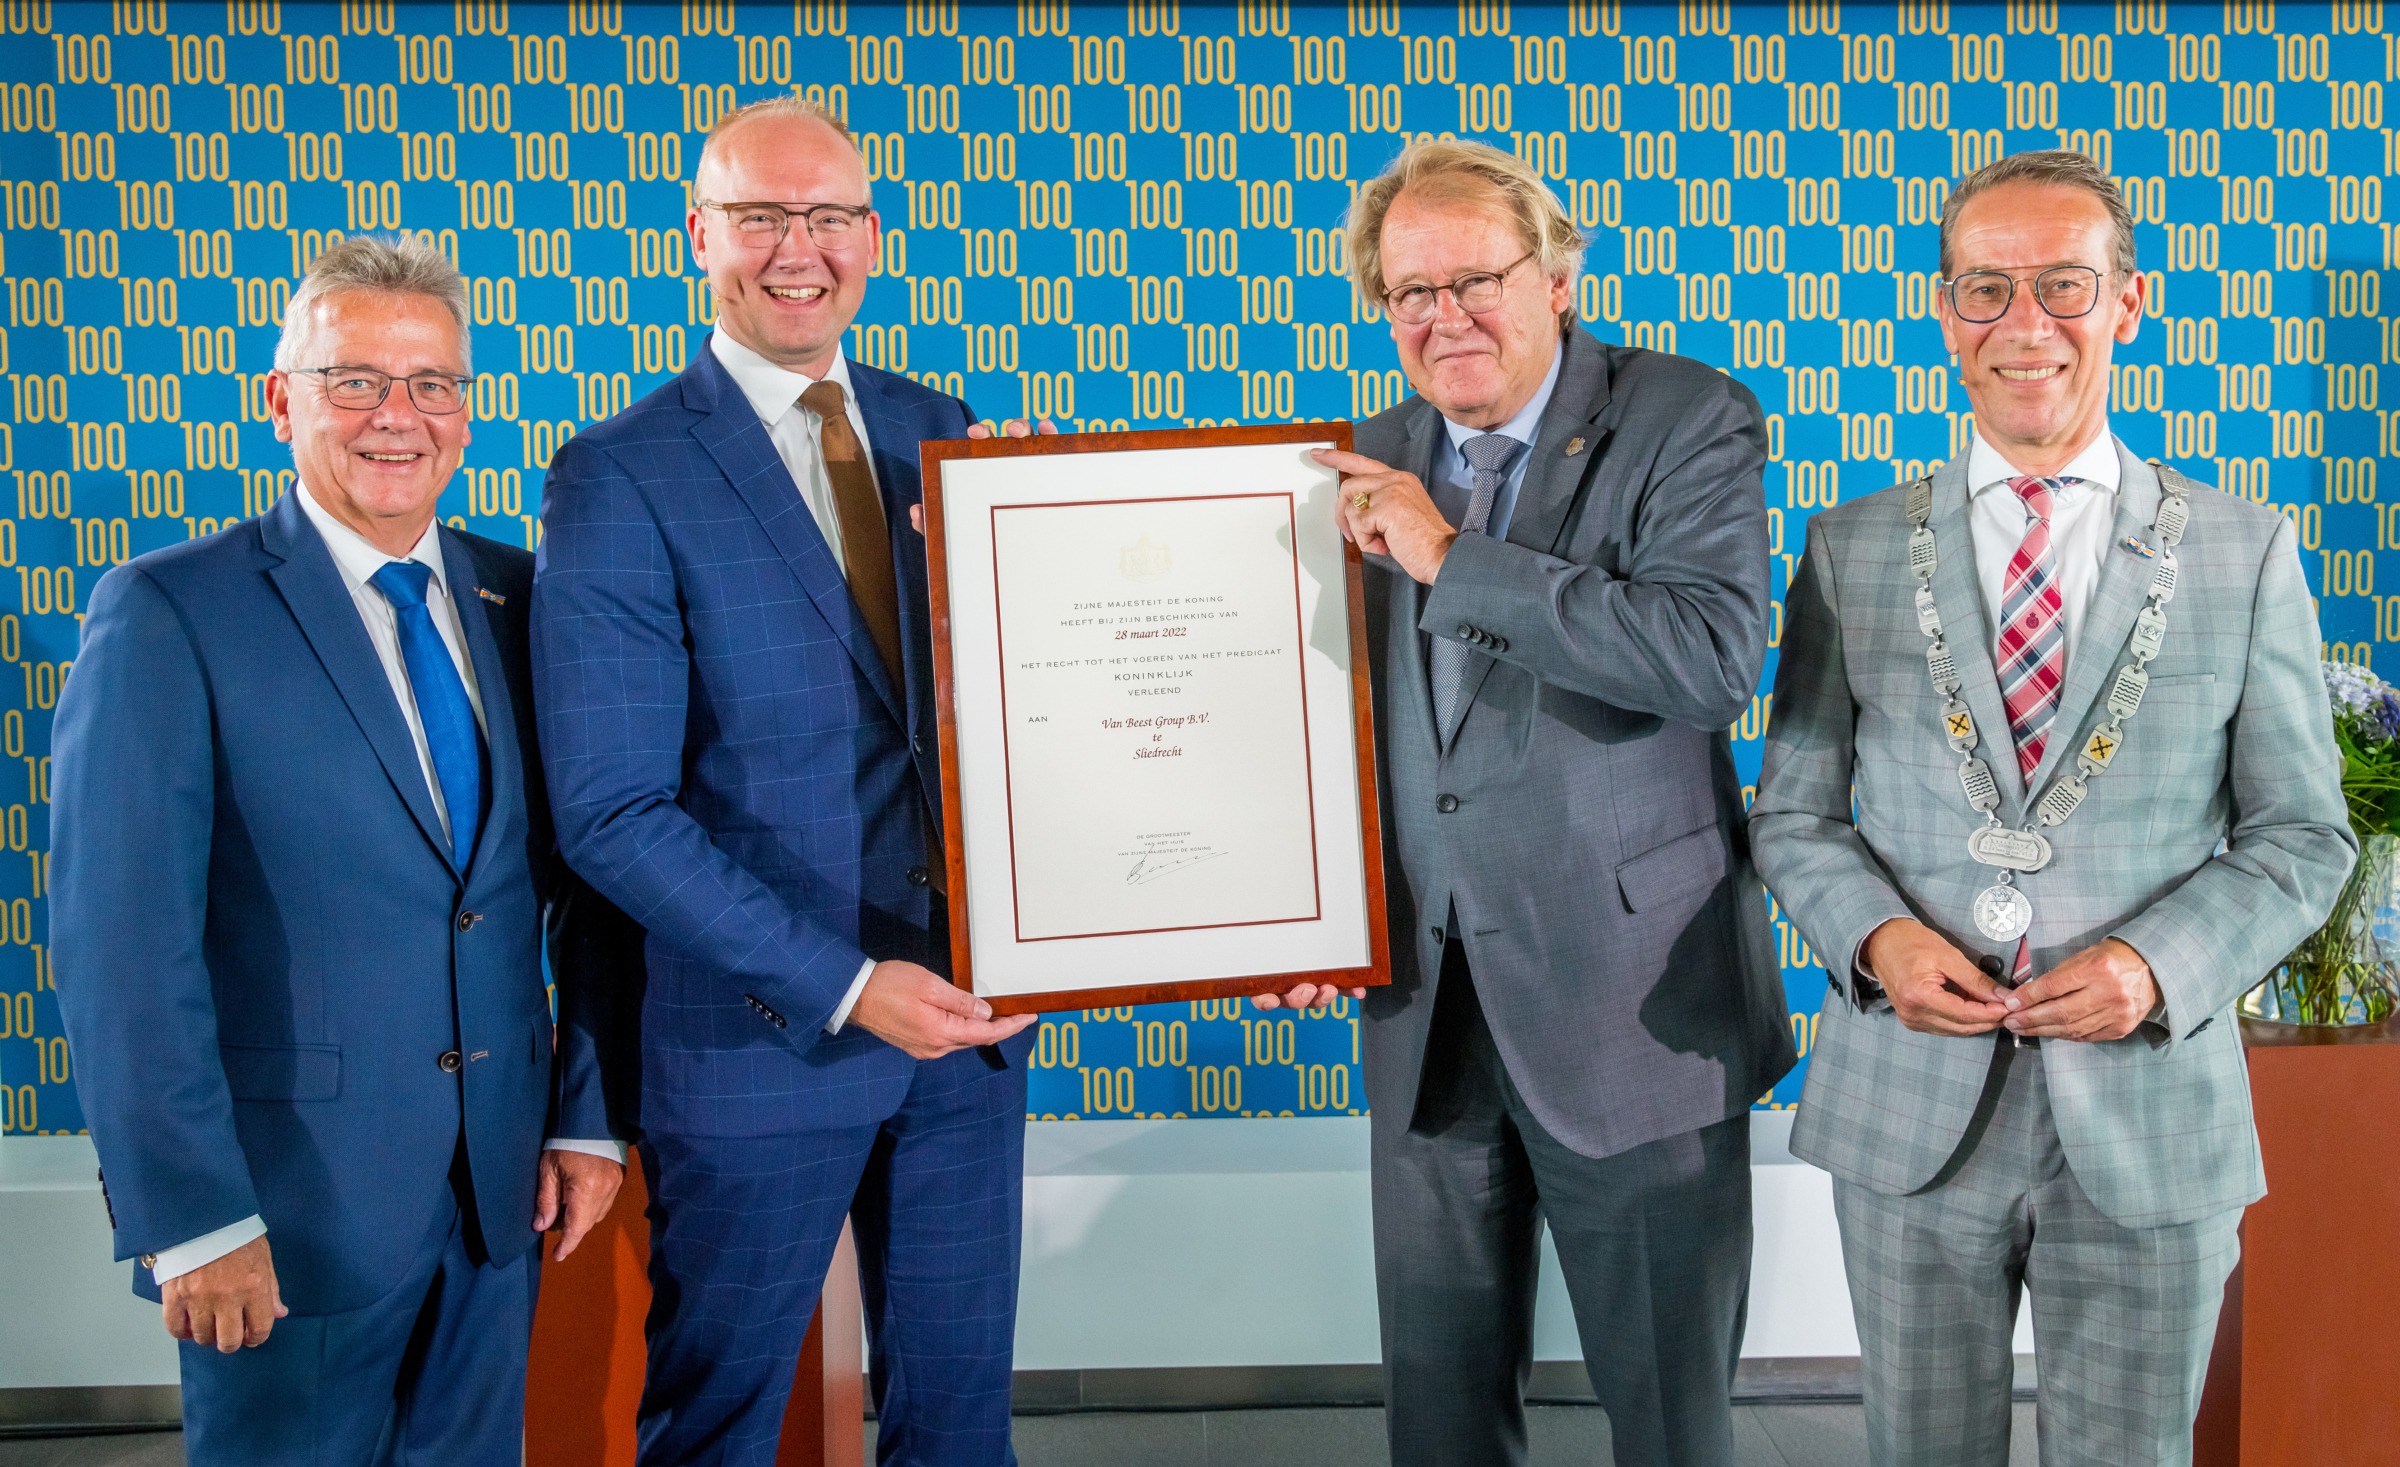 Van Beest Group granted the Royal title upon its 100th anniversary